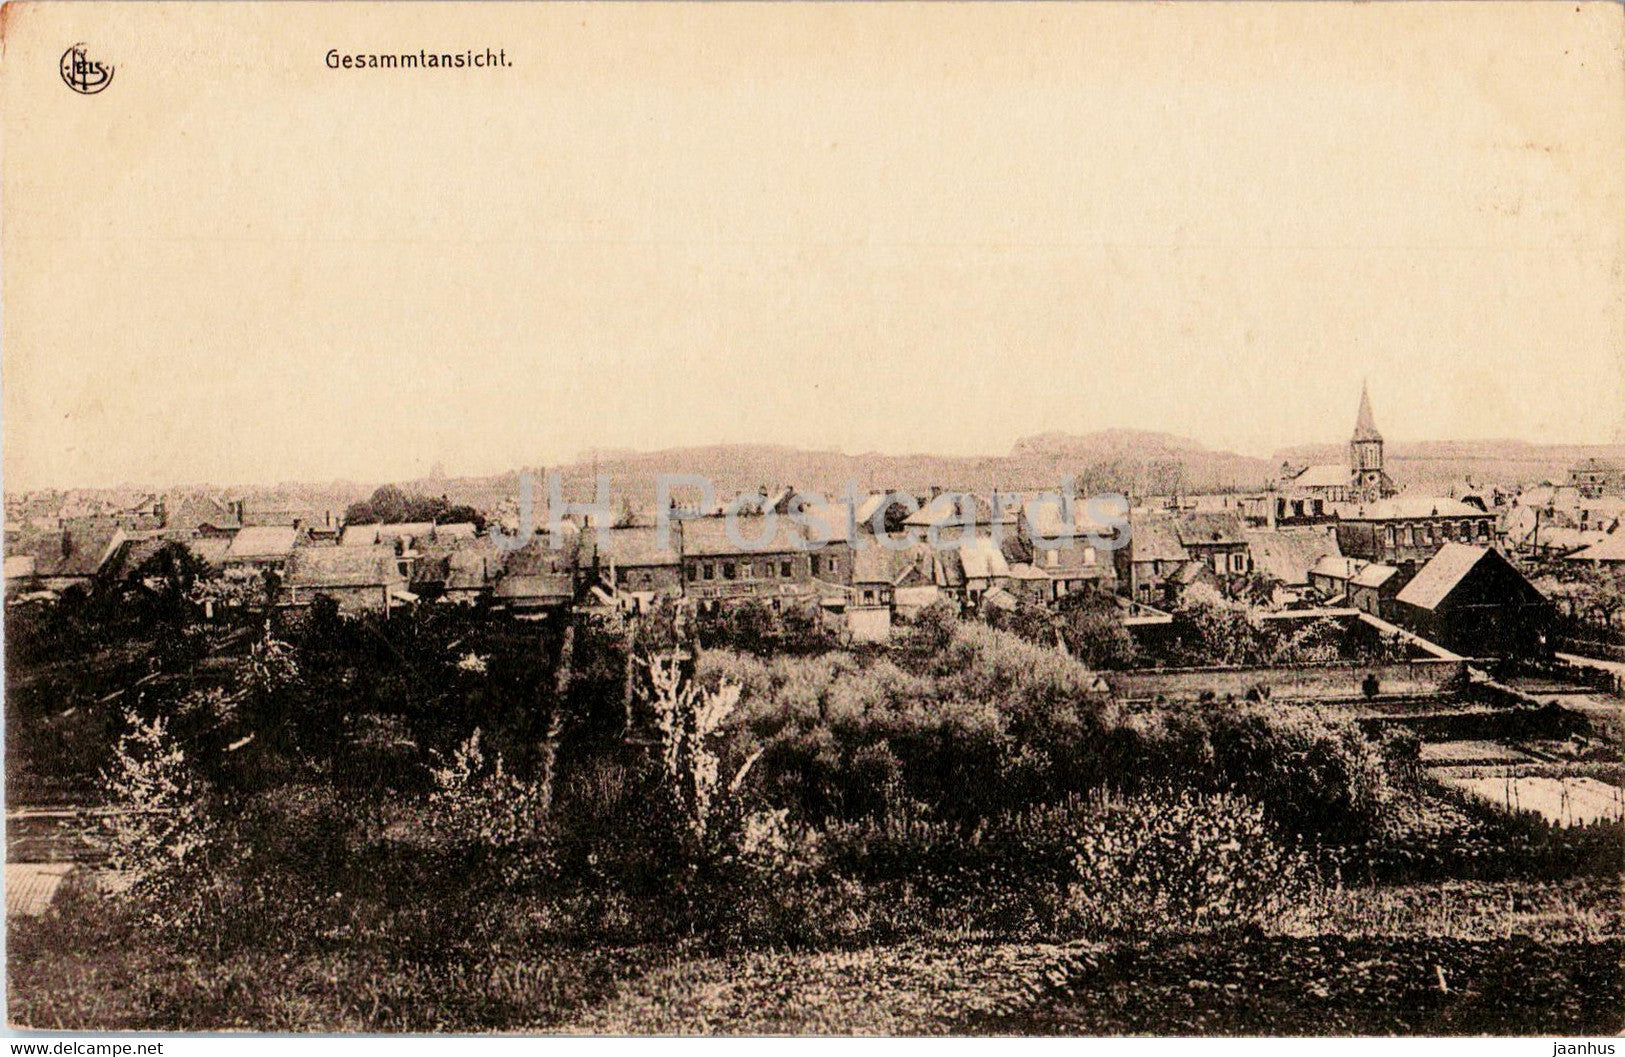 Hirson - Gesammtansicht - general view - old postcard - France - used - JH Postcards